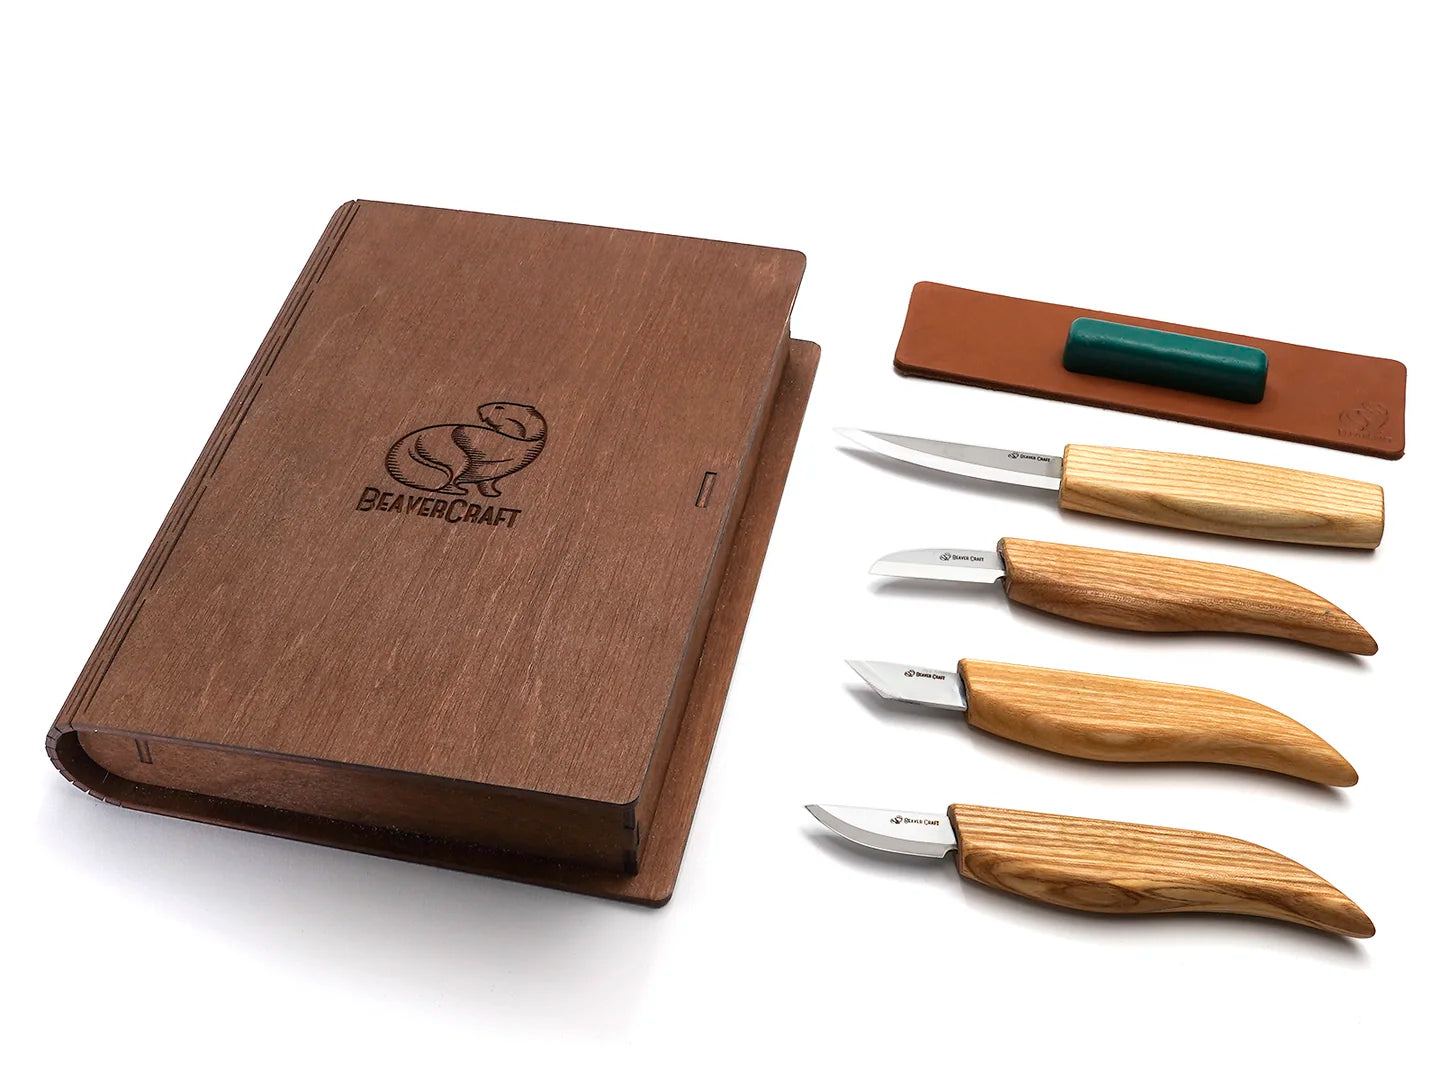 Hobby Knife Set Wood Carving, Architecture Wood Carving